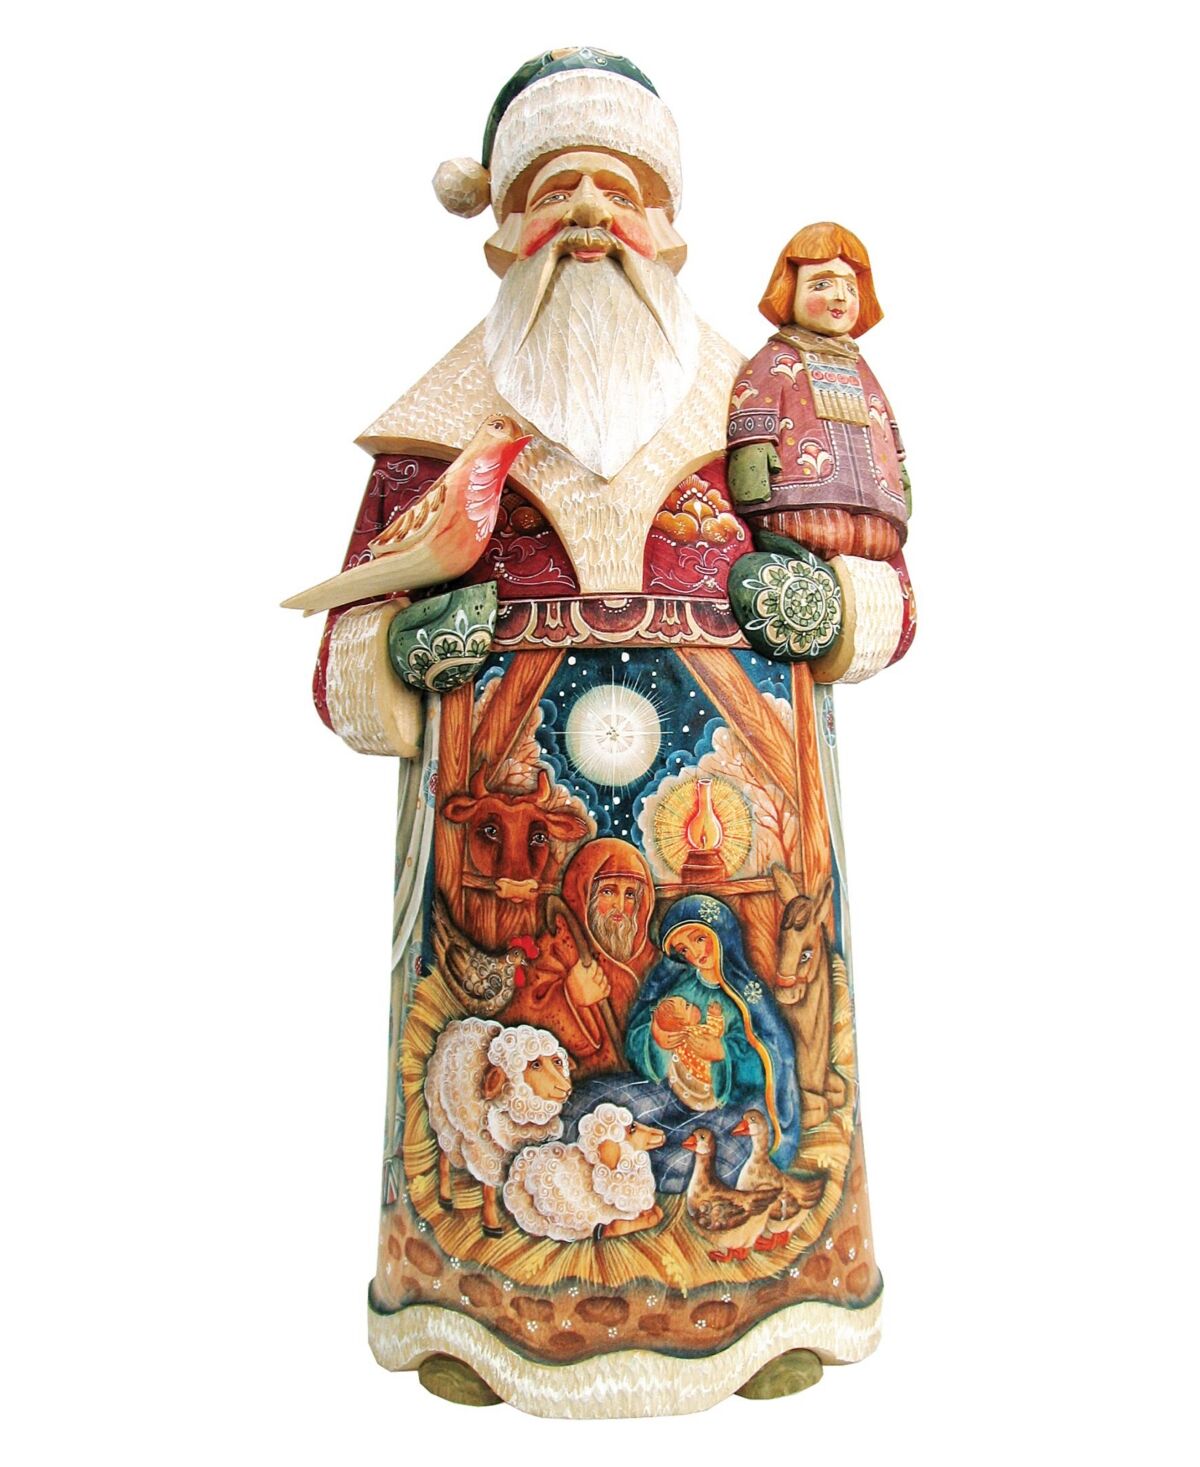 G.DeBrekht Woodcarved and Hand Painted Nativity Santa Claus Figurine - Multi